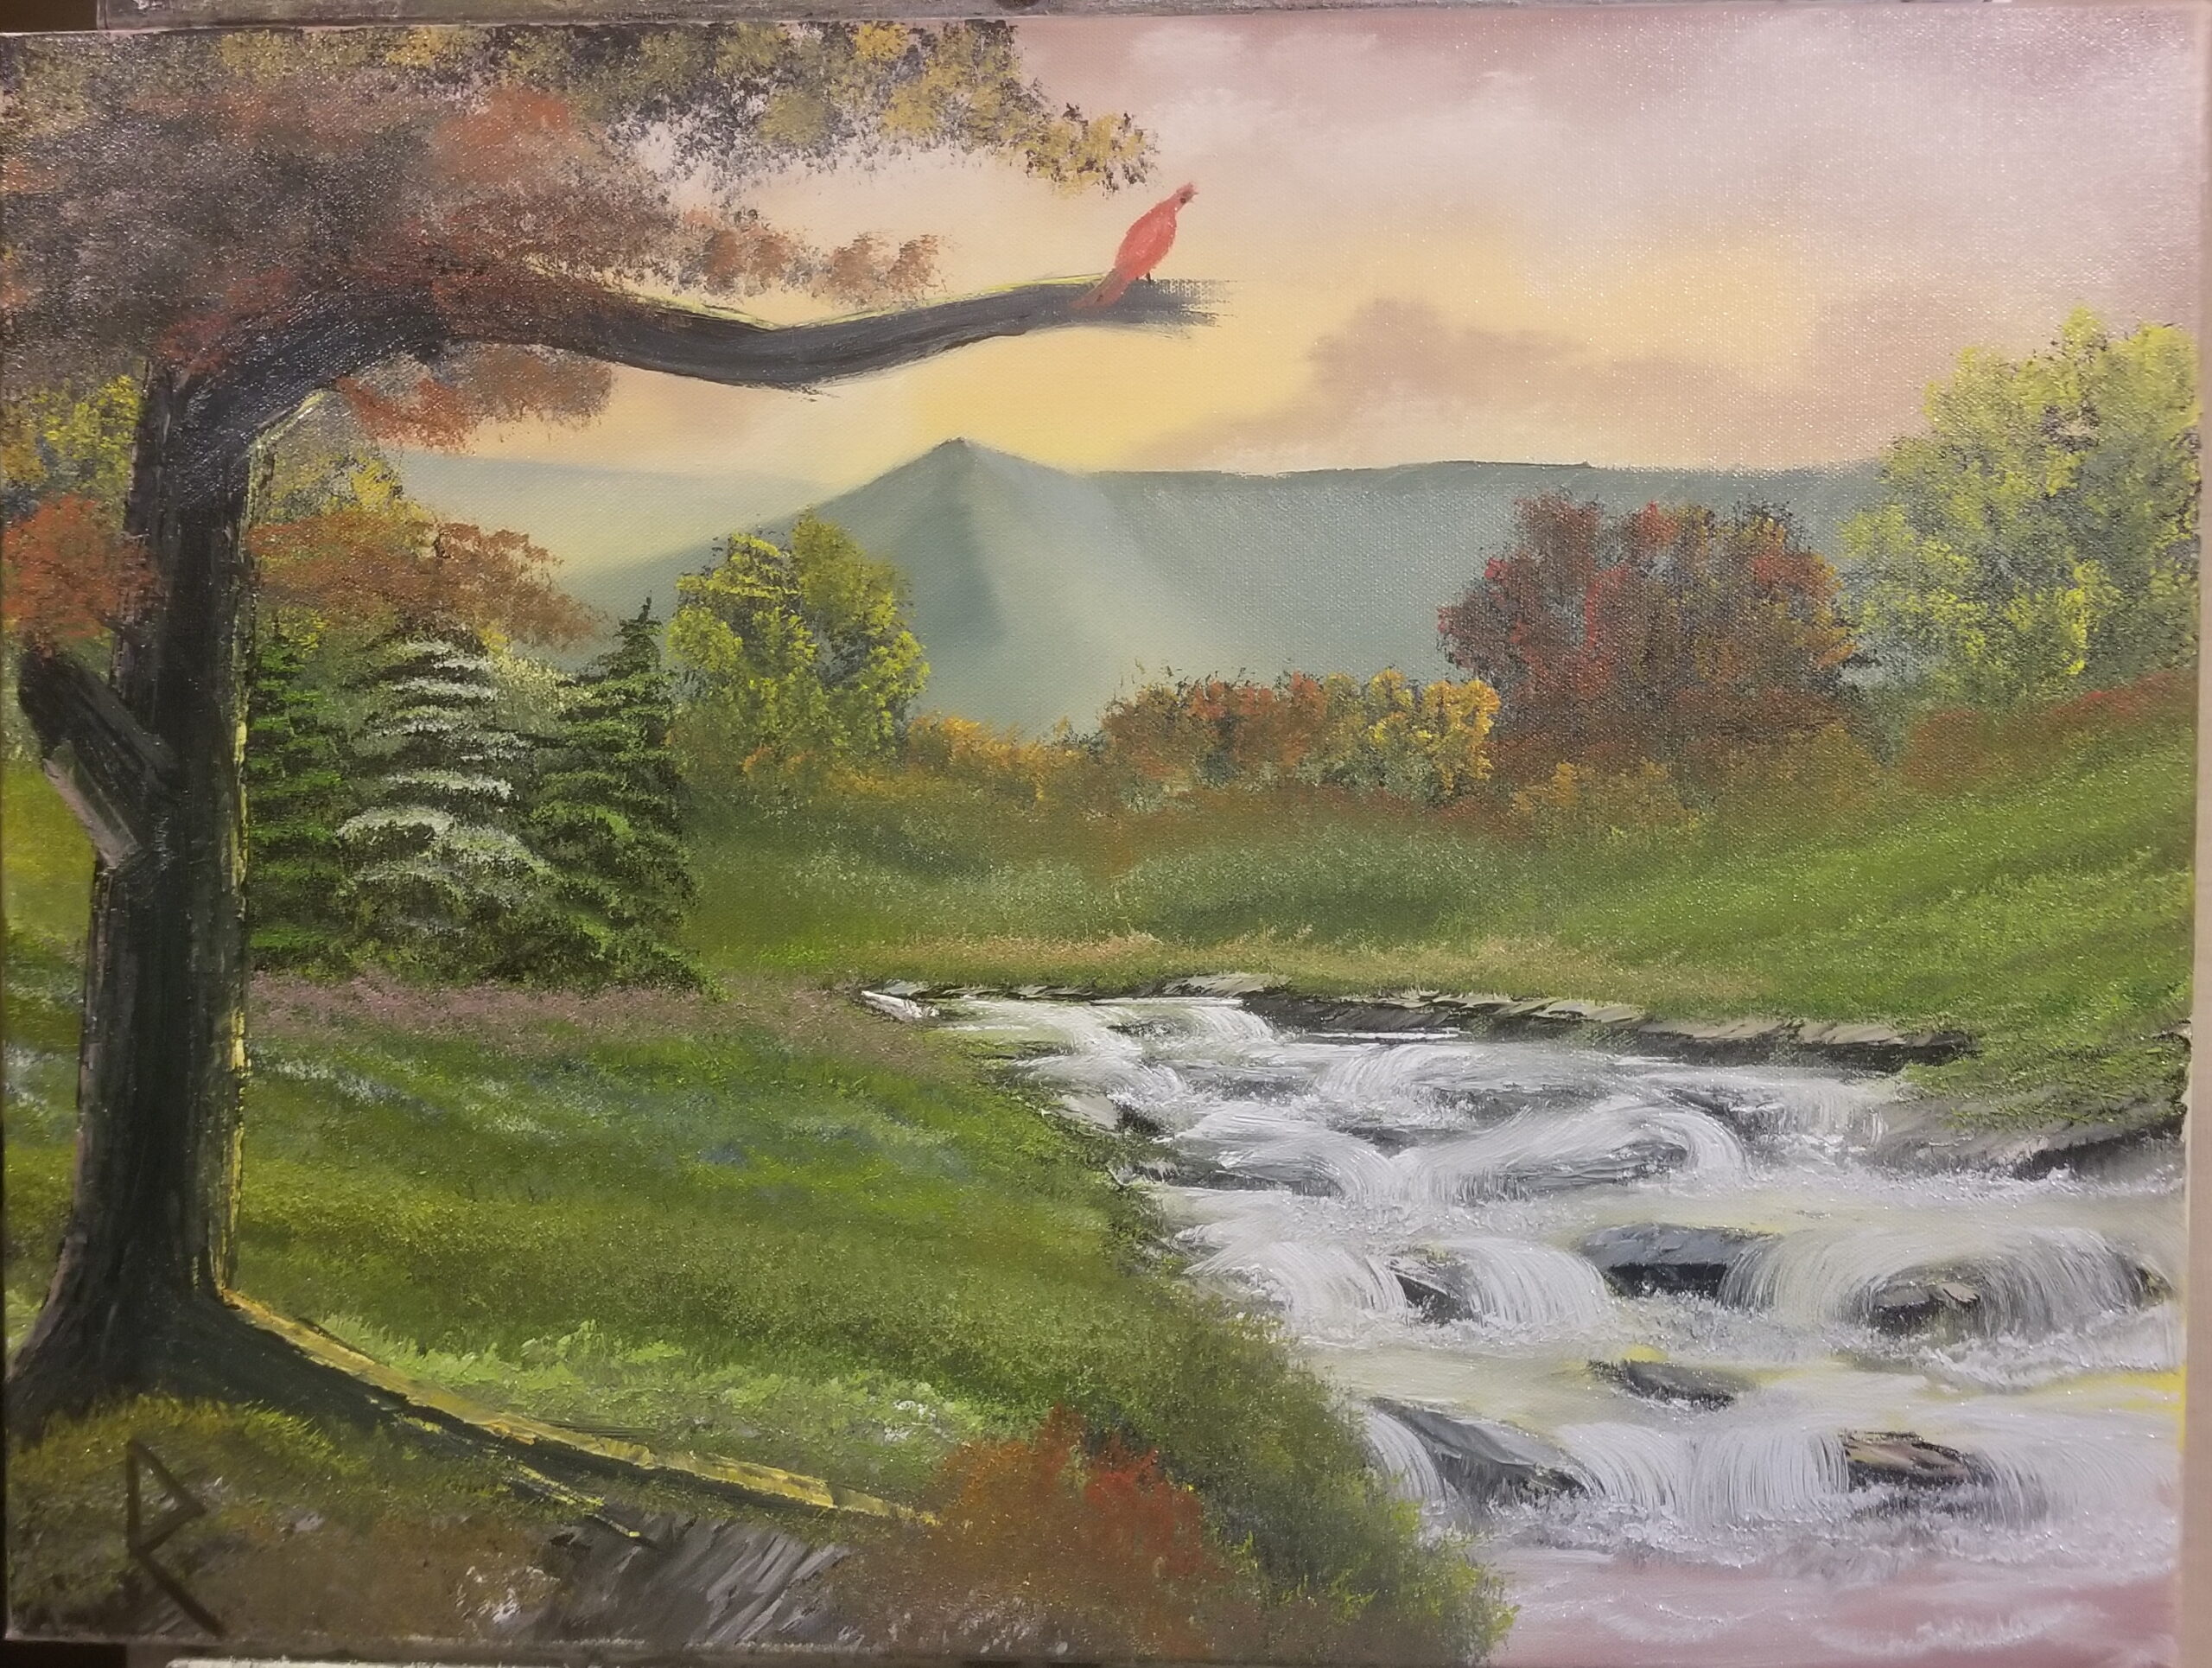 Oil painting on 18"x24" canvas. Blue Ridge Mountains in the distance, below evening/morning sky, fall foliage and a turbulent stream.